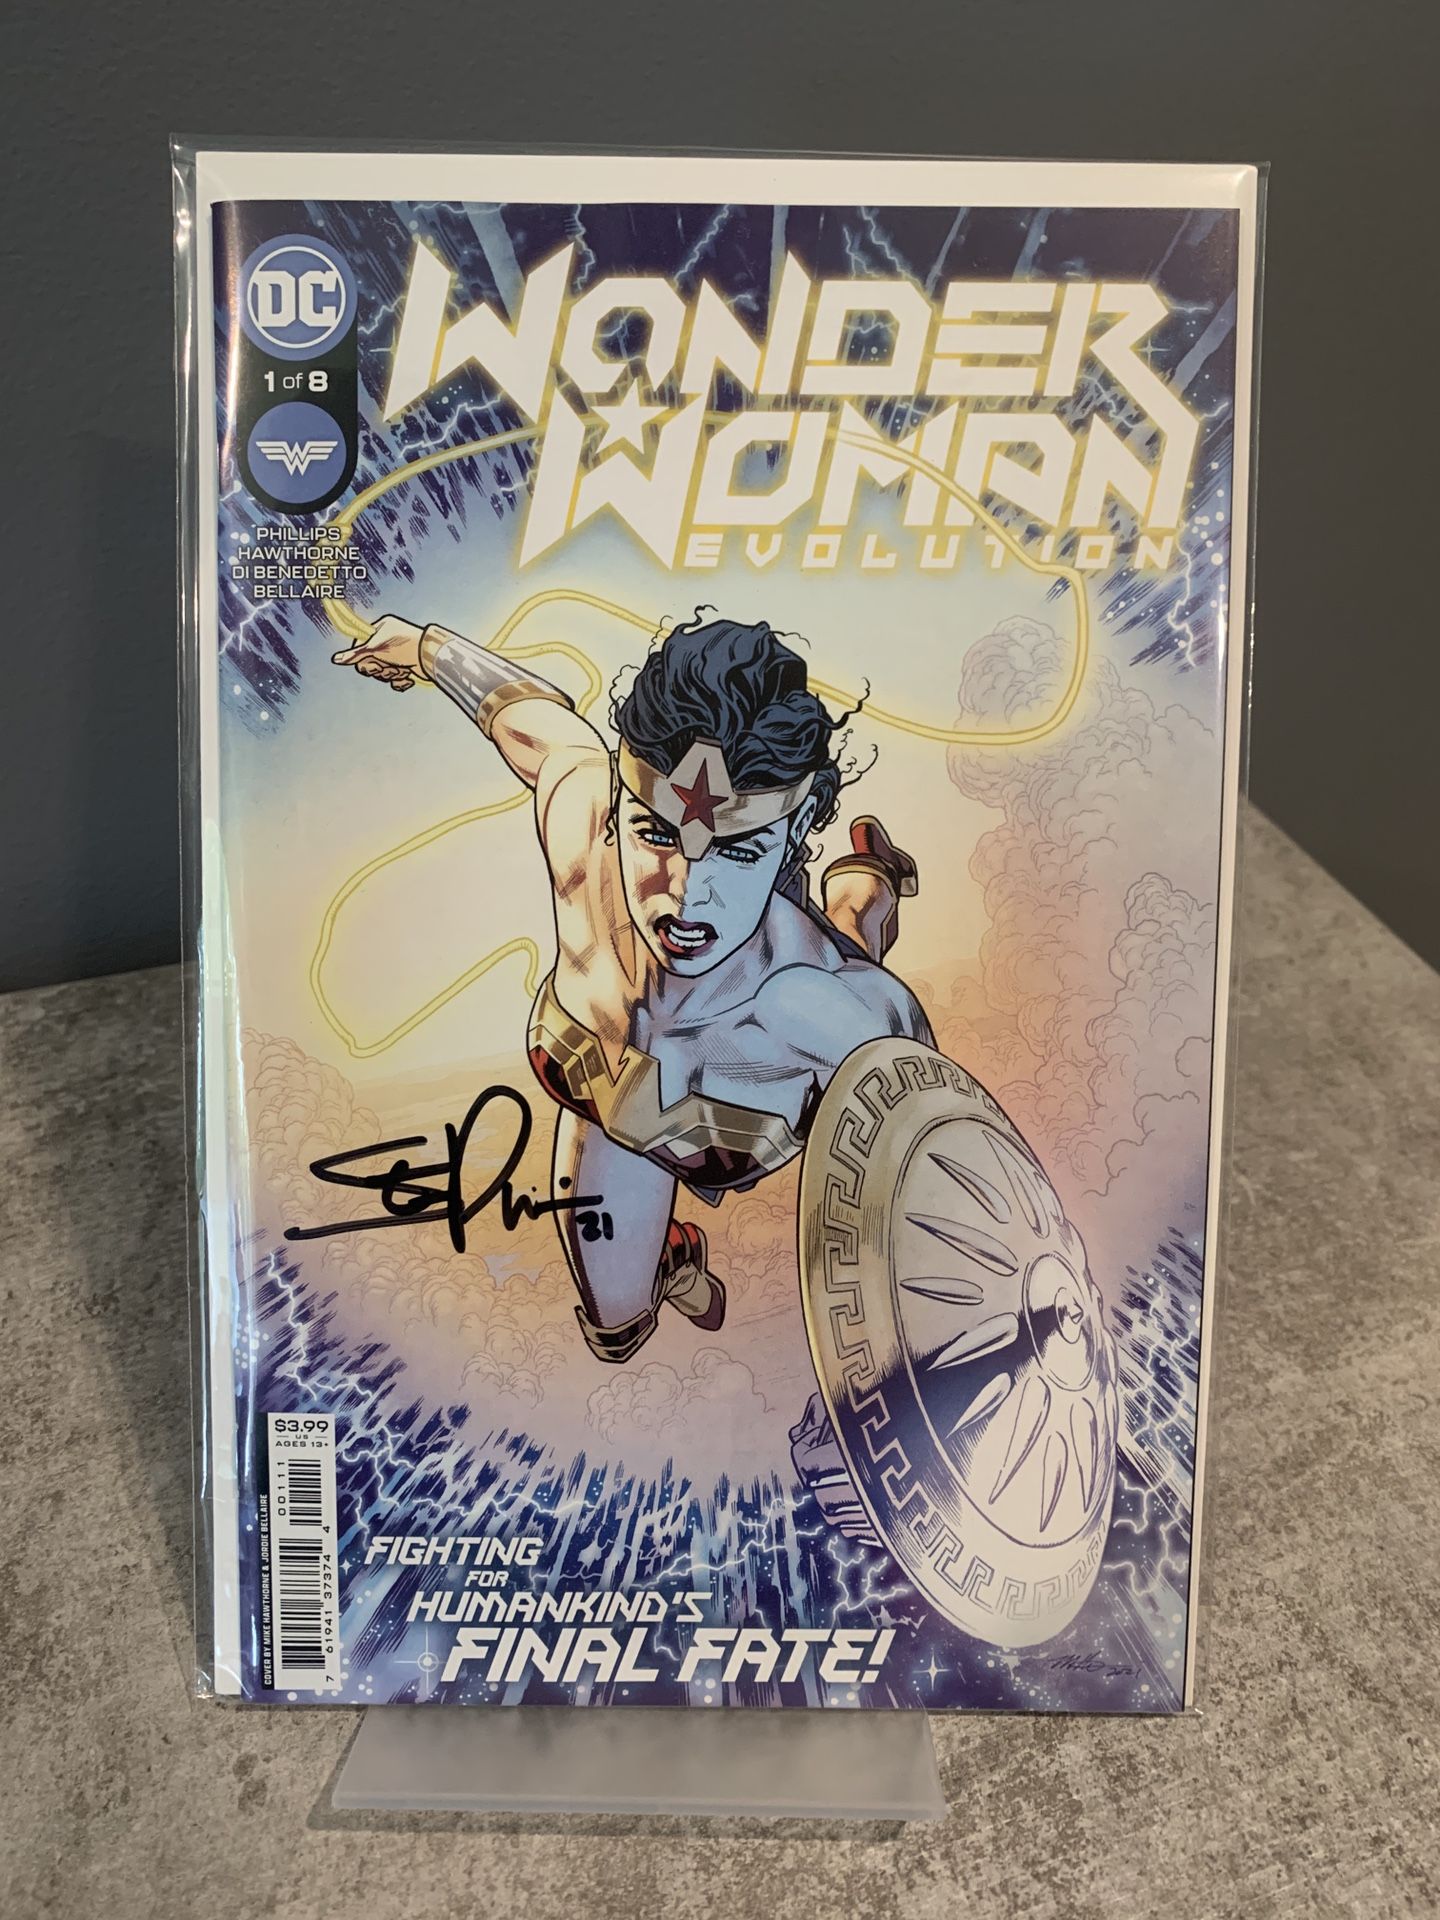 Wonder Woman: Evolution #1 (DC Comics, 2021) — Signed By Stephanie Phillips